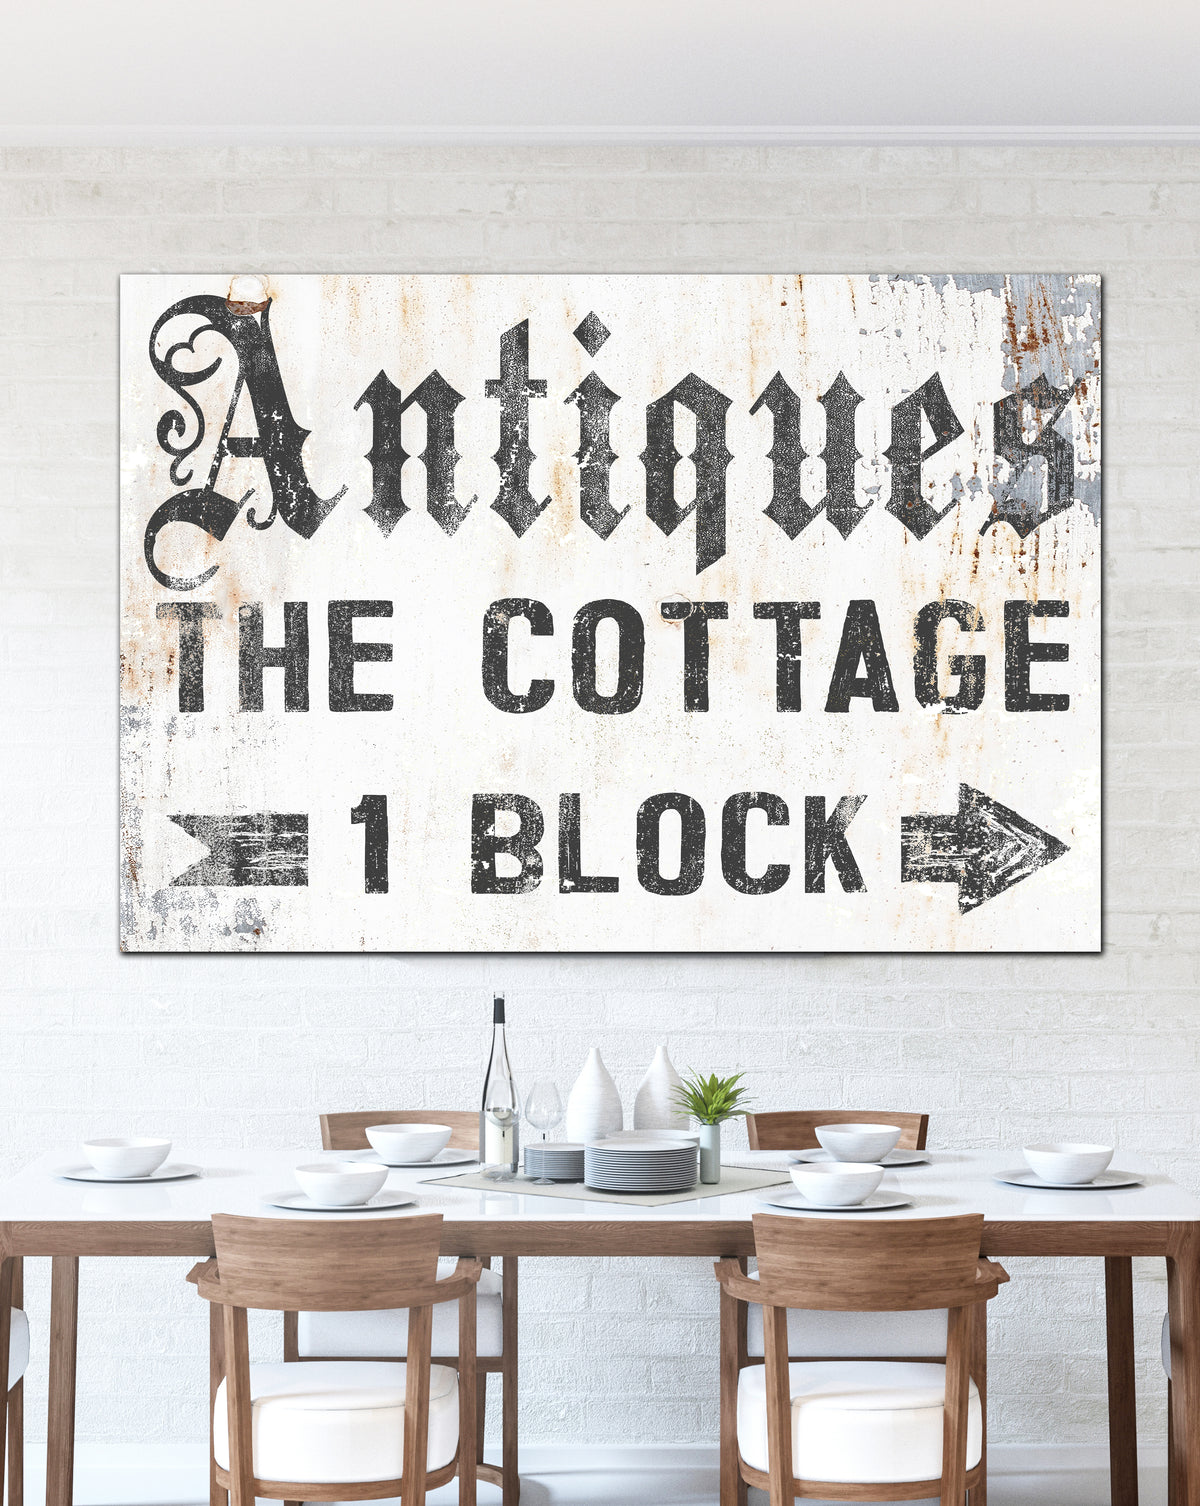 Antiques and Vintage Goods Sign Modern Farmhouse Decor 